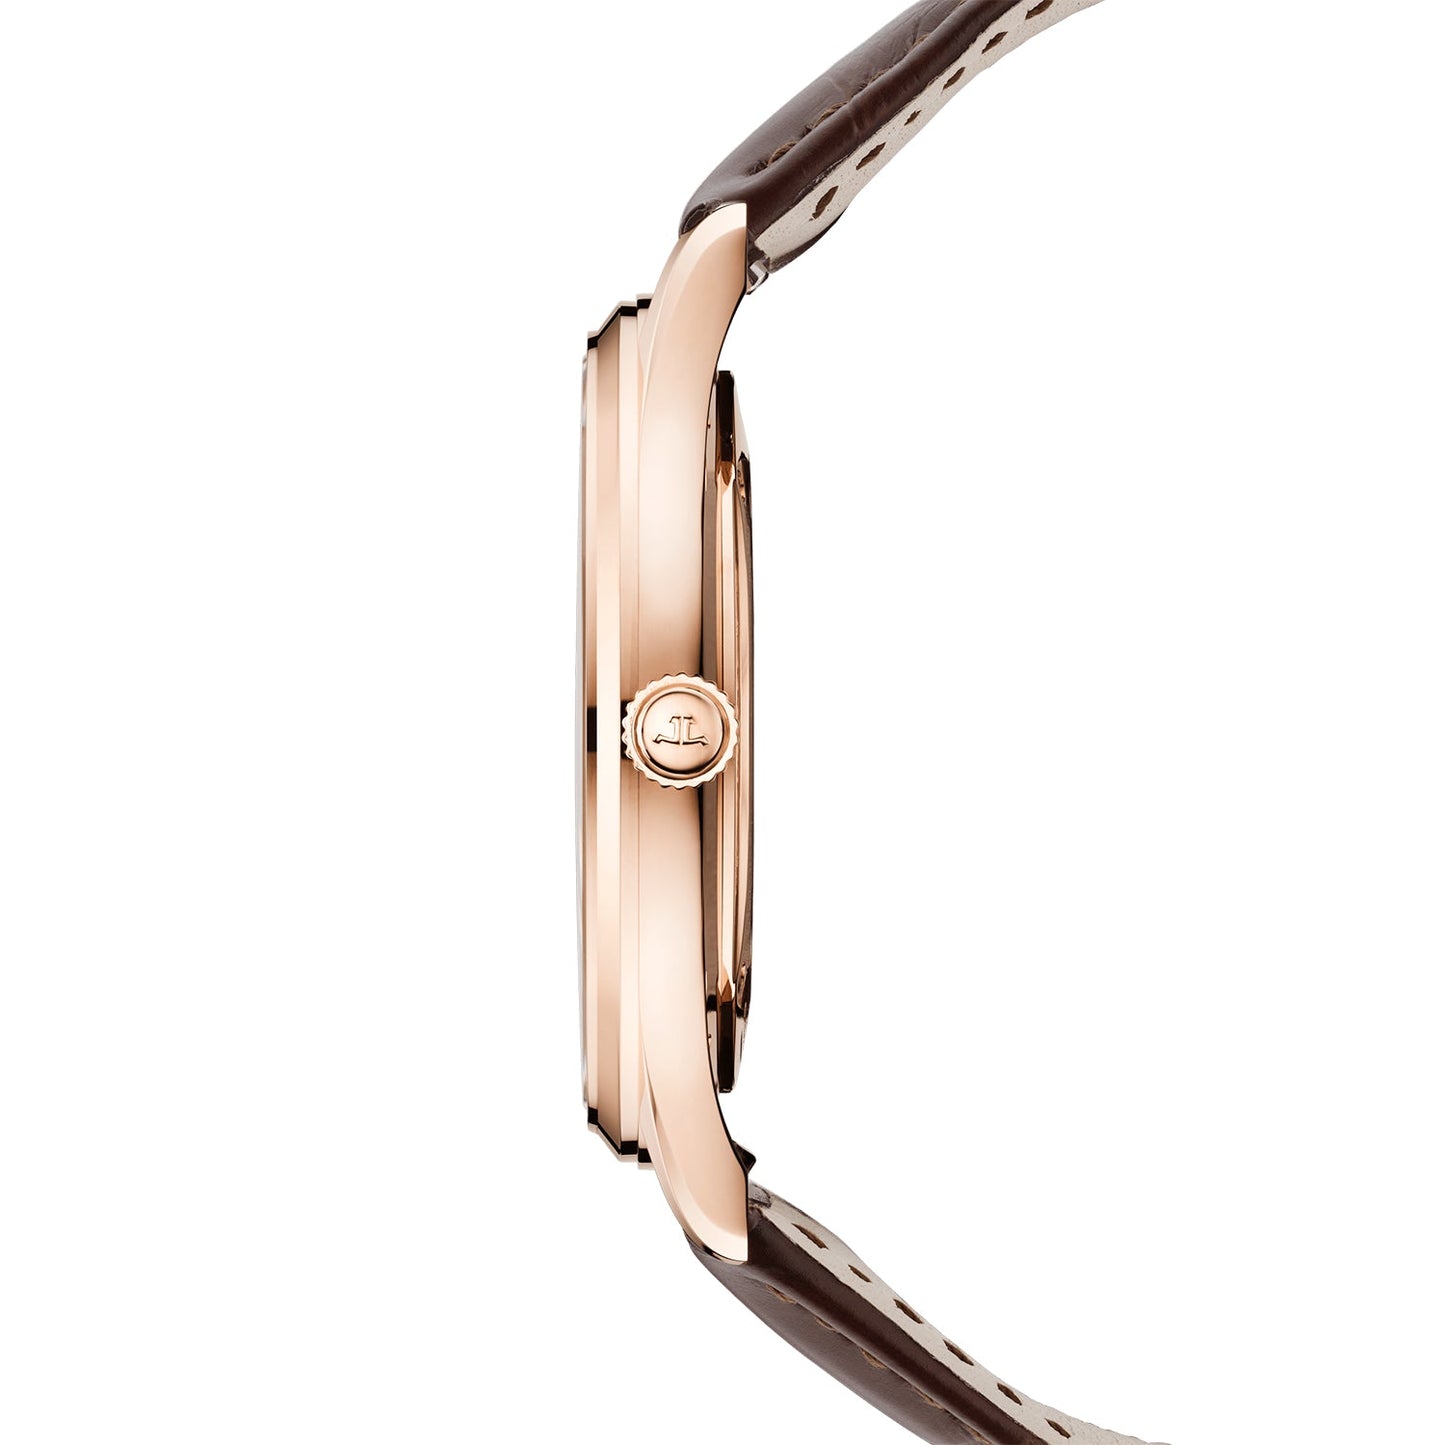 Jaeger-LeCoultre - Master Ultra Thin Date (Q1232510)